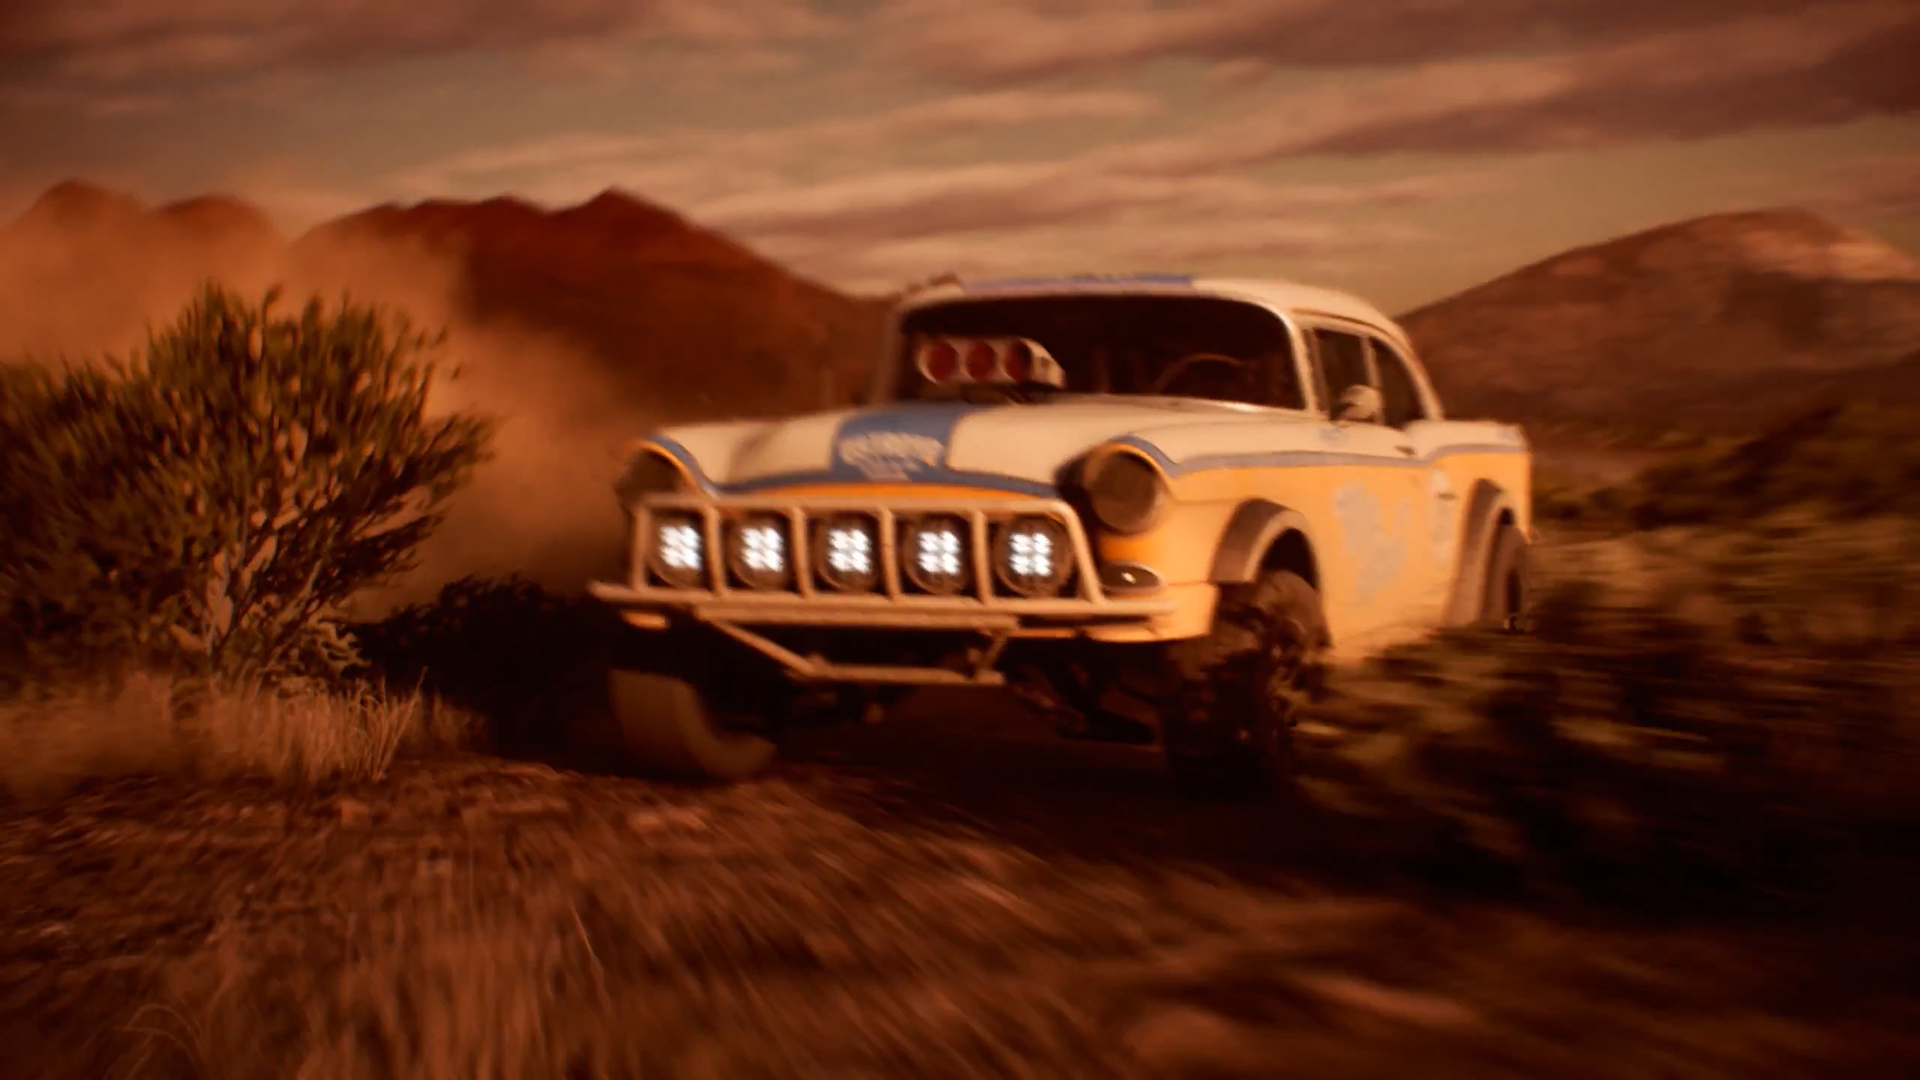 Nfs payback download for windows 10